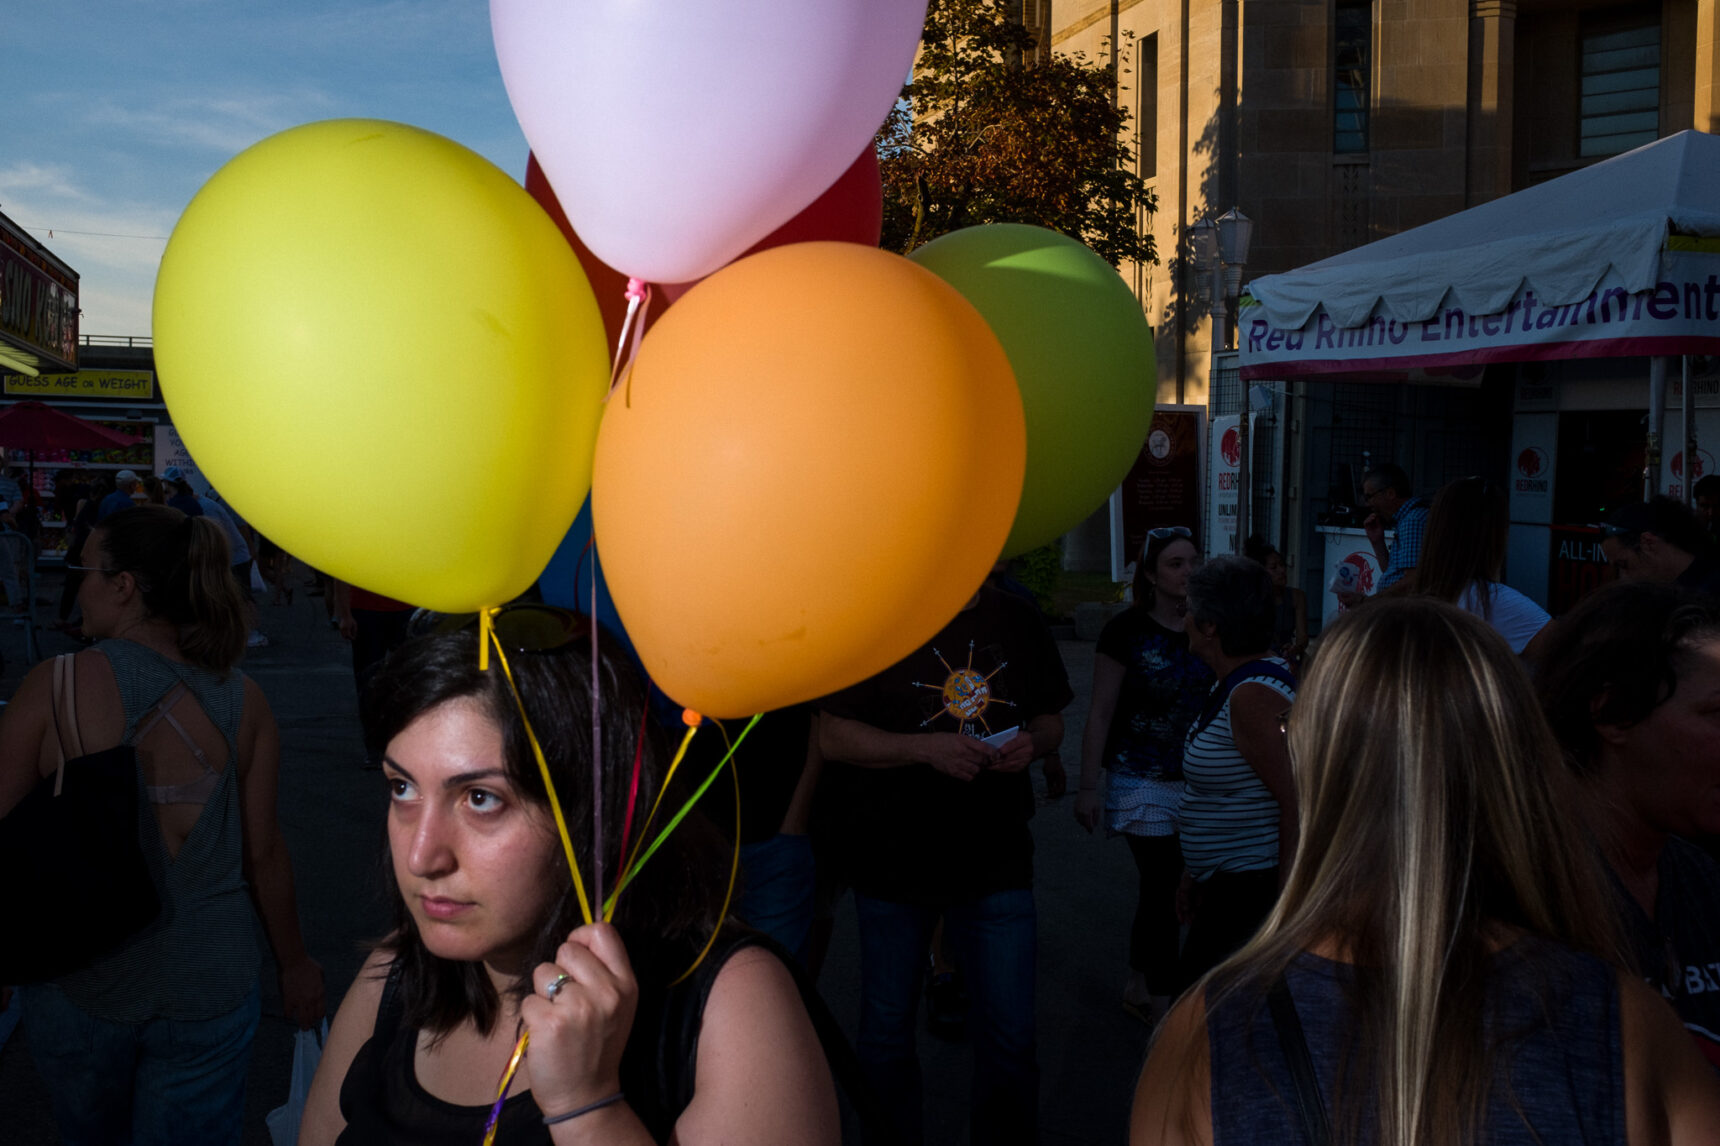 Street Photographer's Guide To The CNE - It's About The People